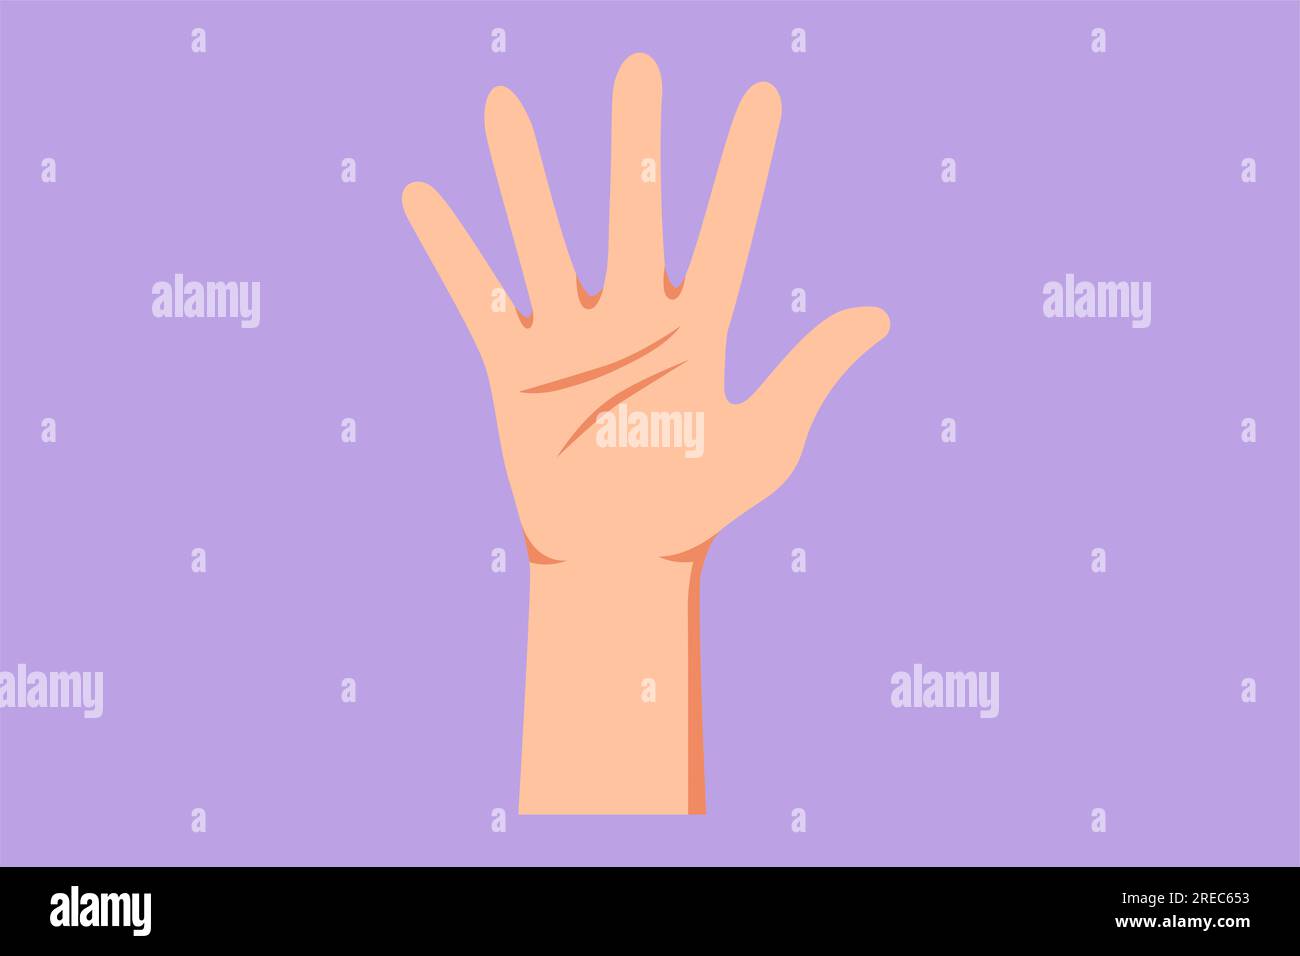 Graphic flat design drawing hand count number five. Learn to count numbers. Concept of education for children. Nonverbal signs or symbols. High five s Stock Photo